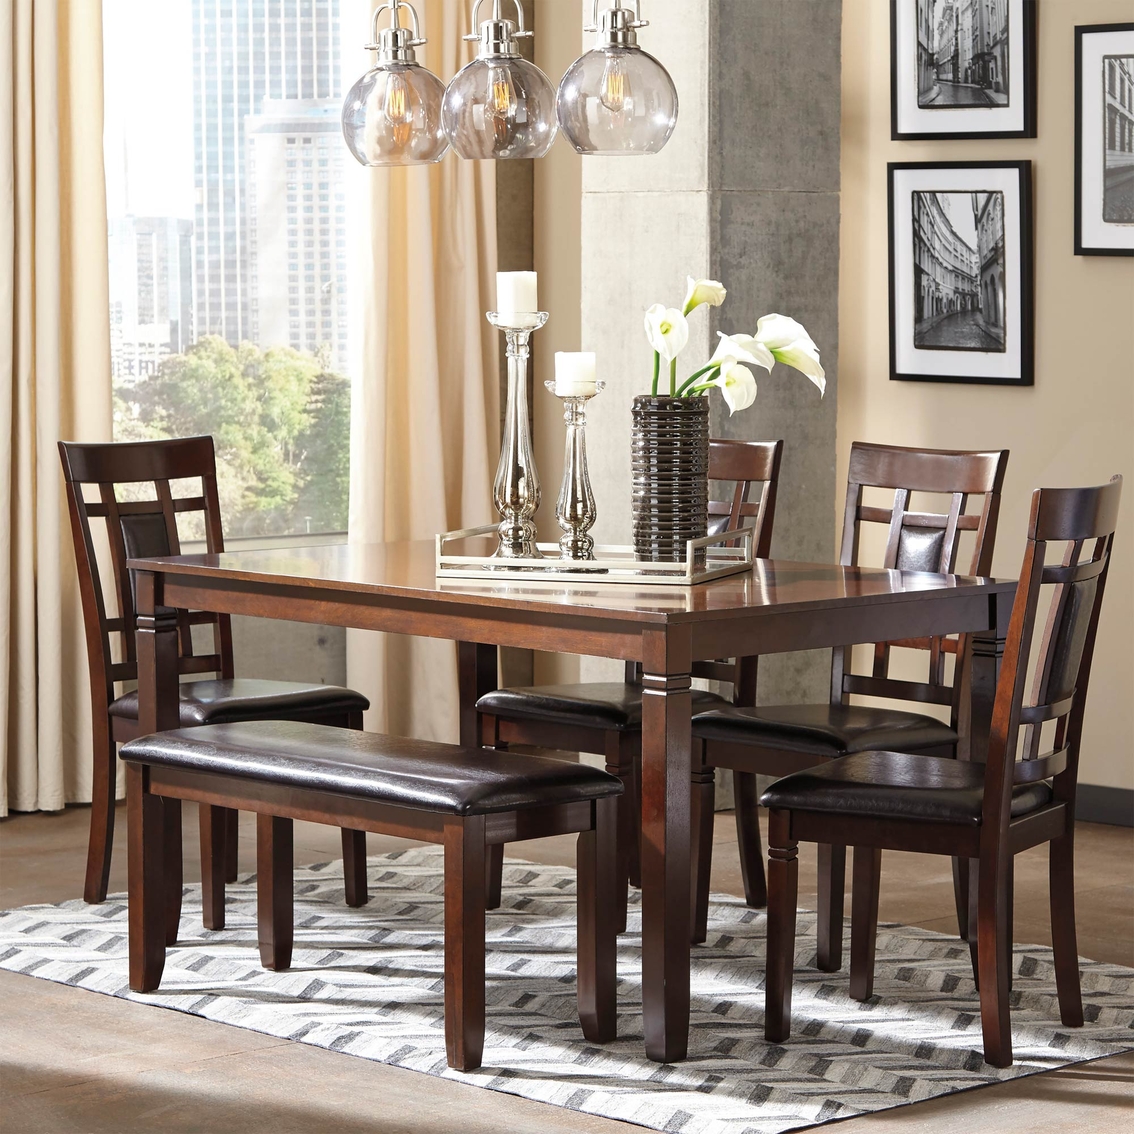 Signature Design by Ashley Bennox Dining Room Table Set with Bench - Image 2 of 3